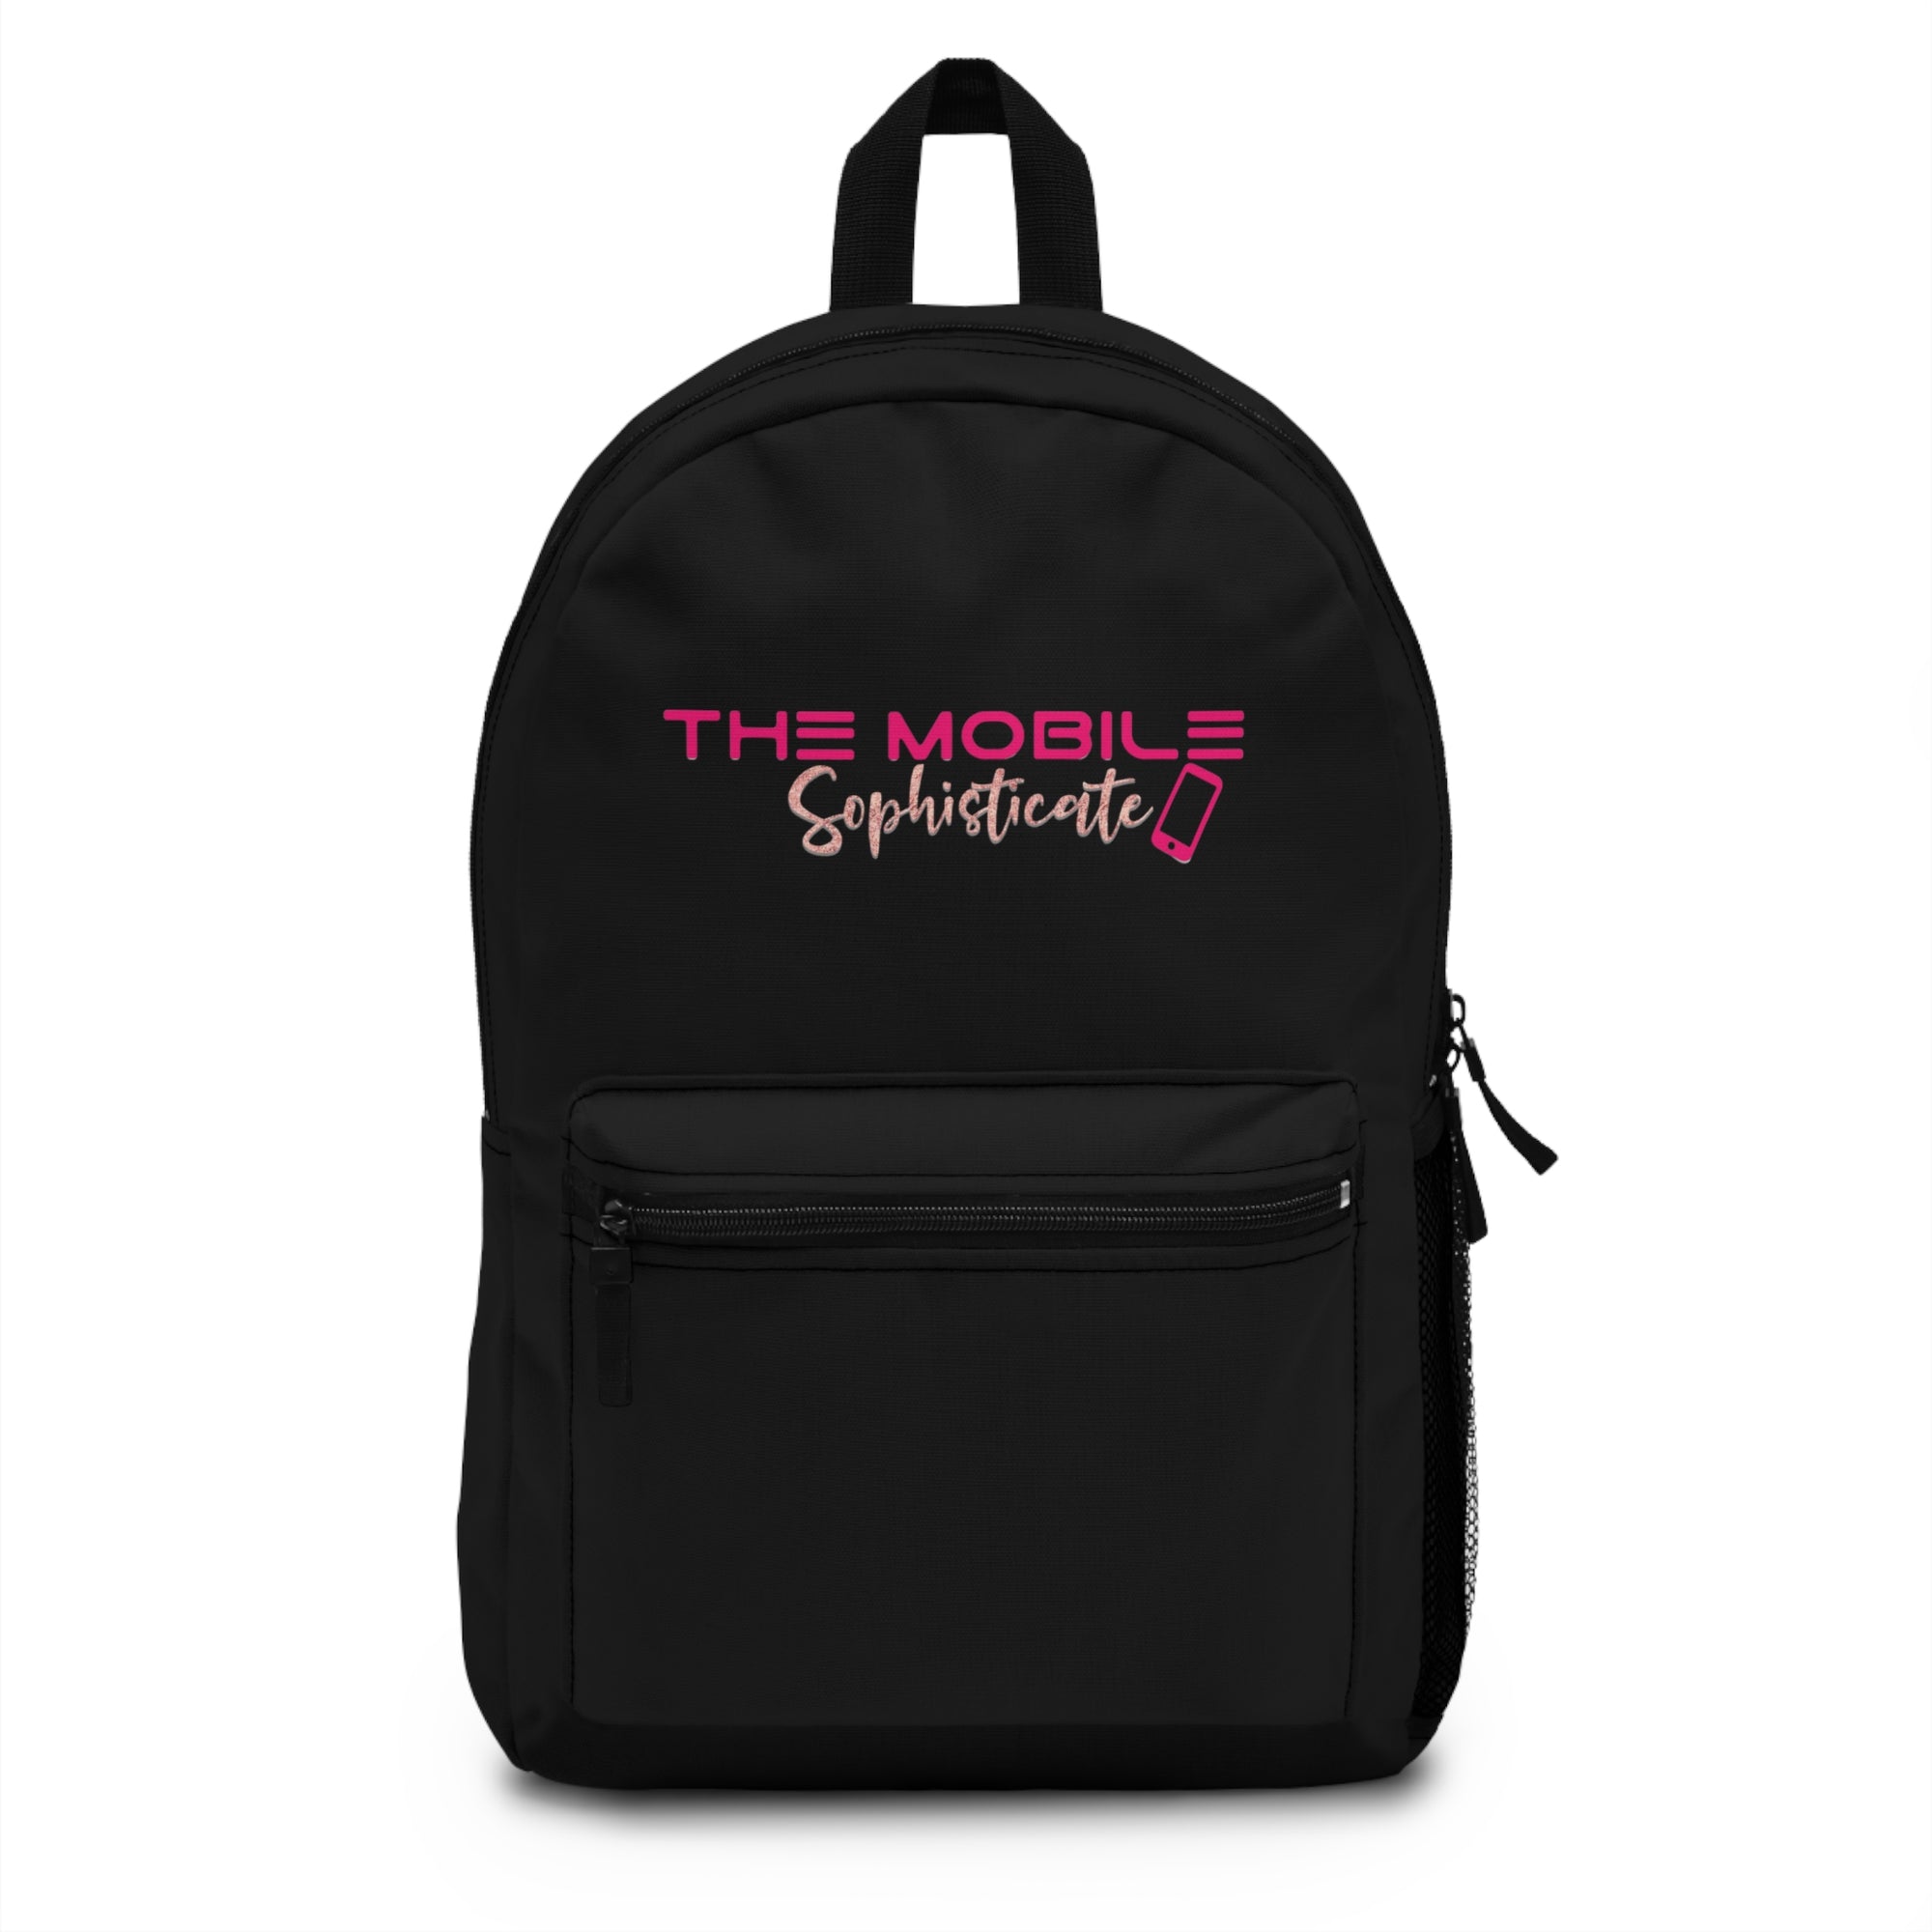 The Mobile Sophisticate Backpack